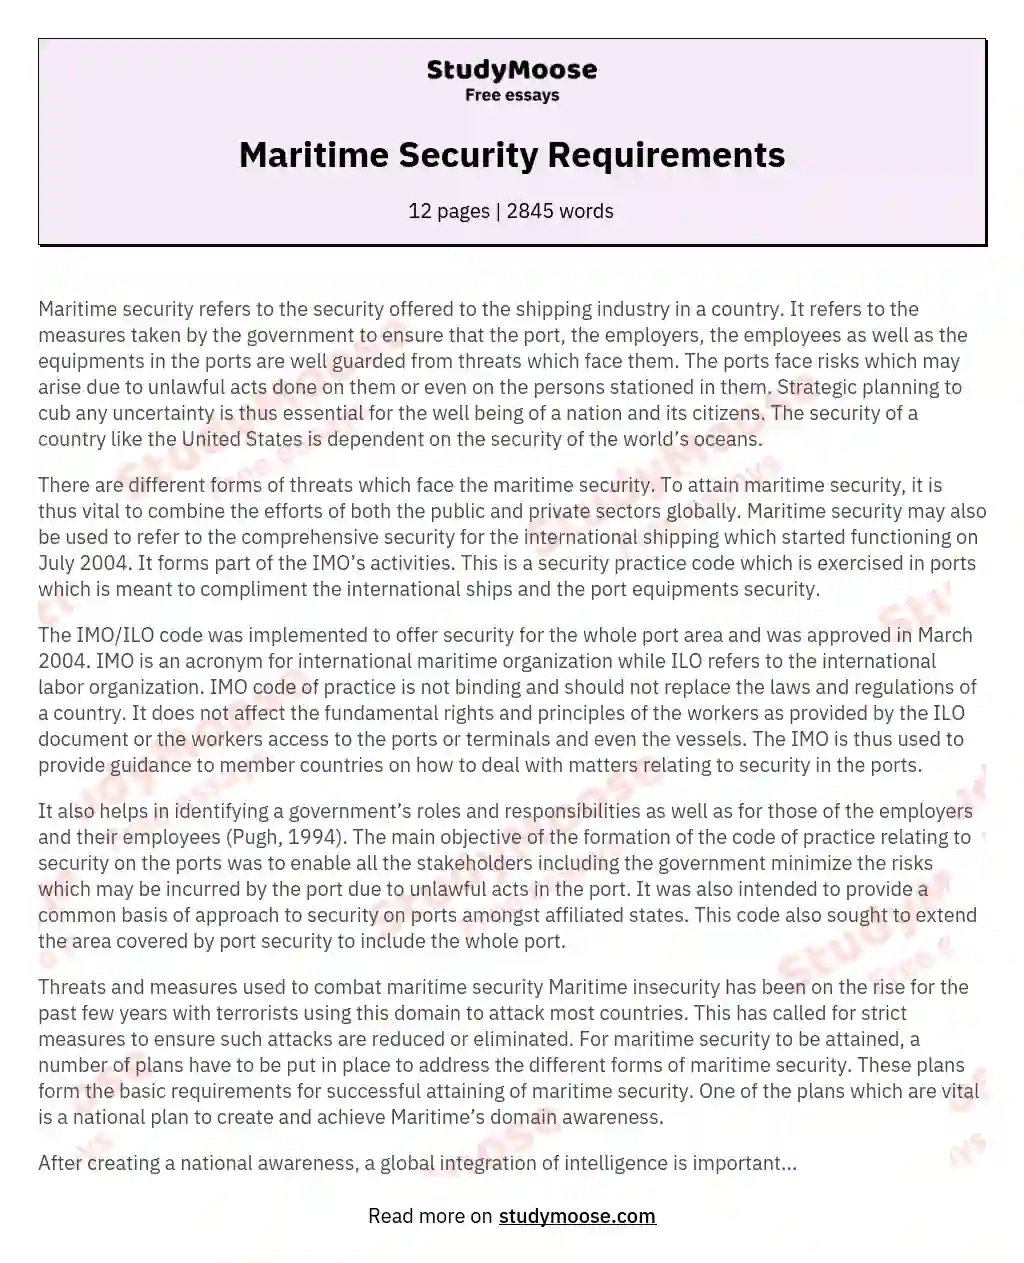 Maritime Security Requirements essay